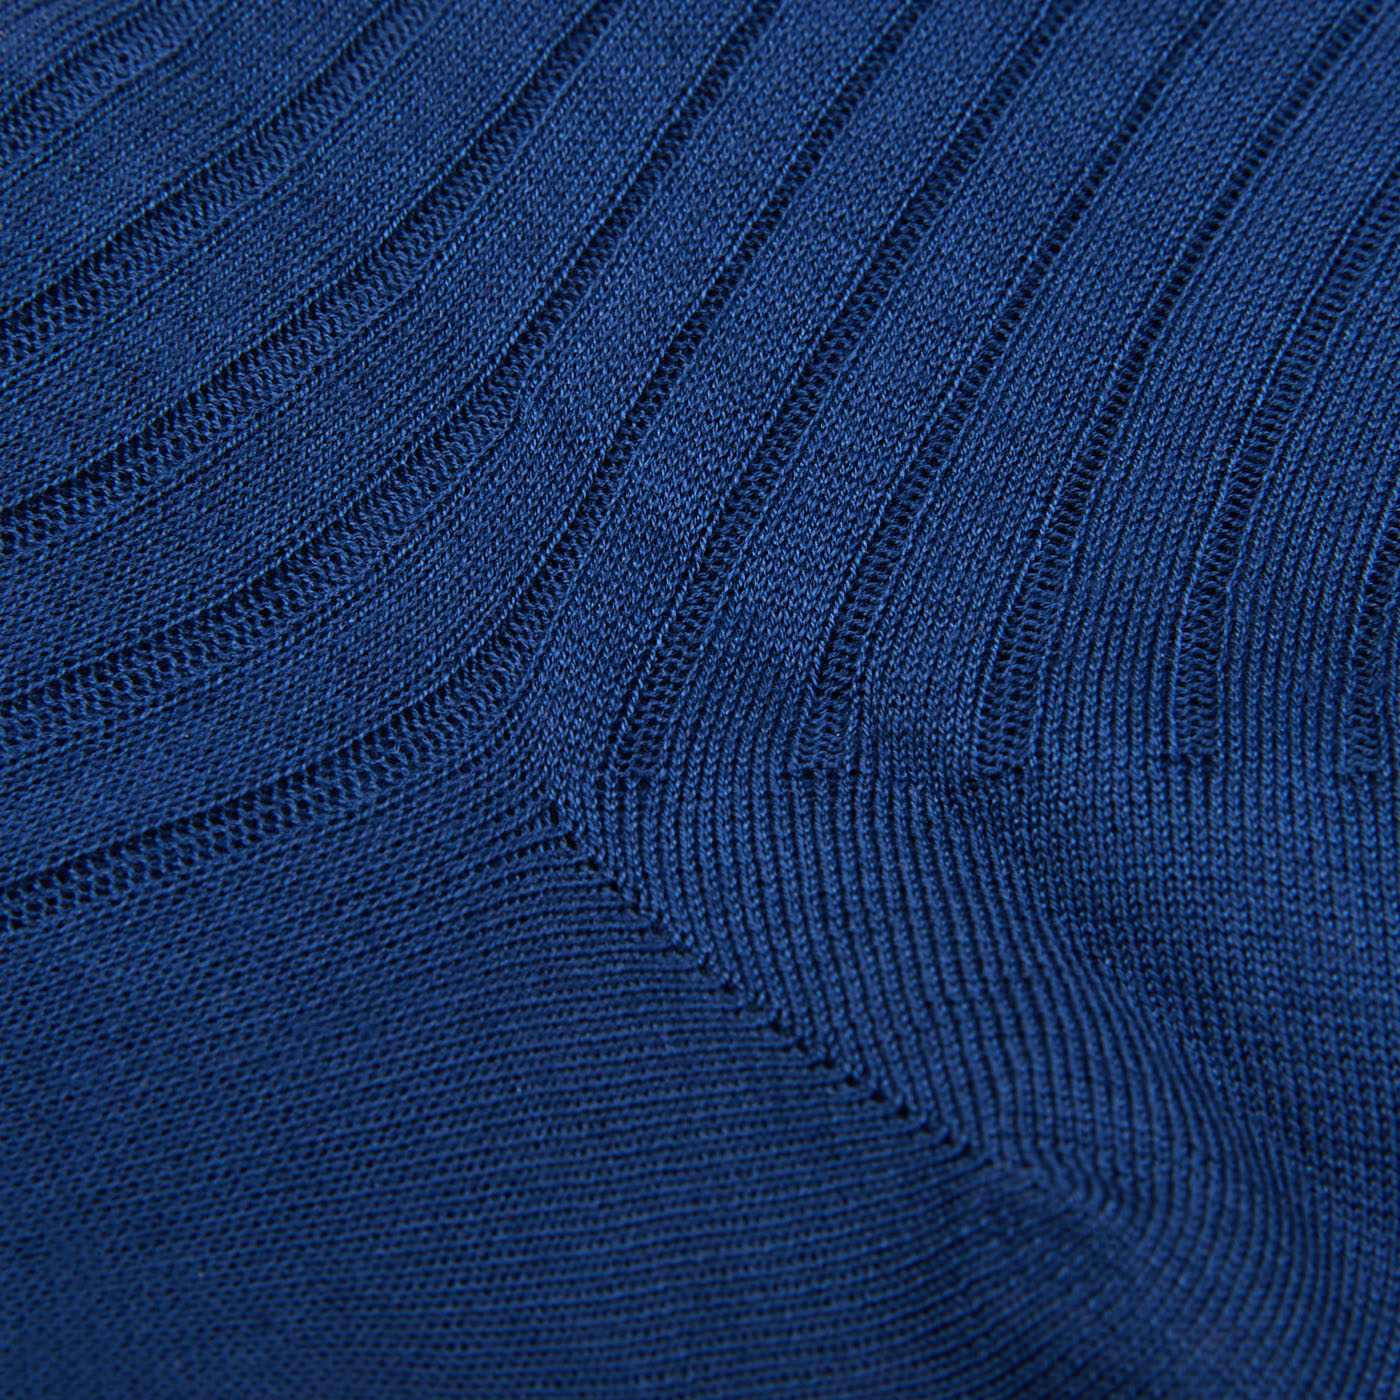 A close up image of a Royal Blue Ribbed Cotton Sock made by Canali.